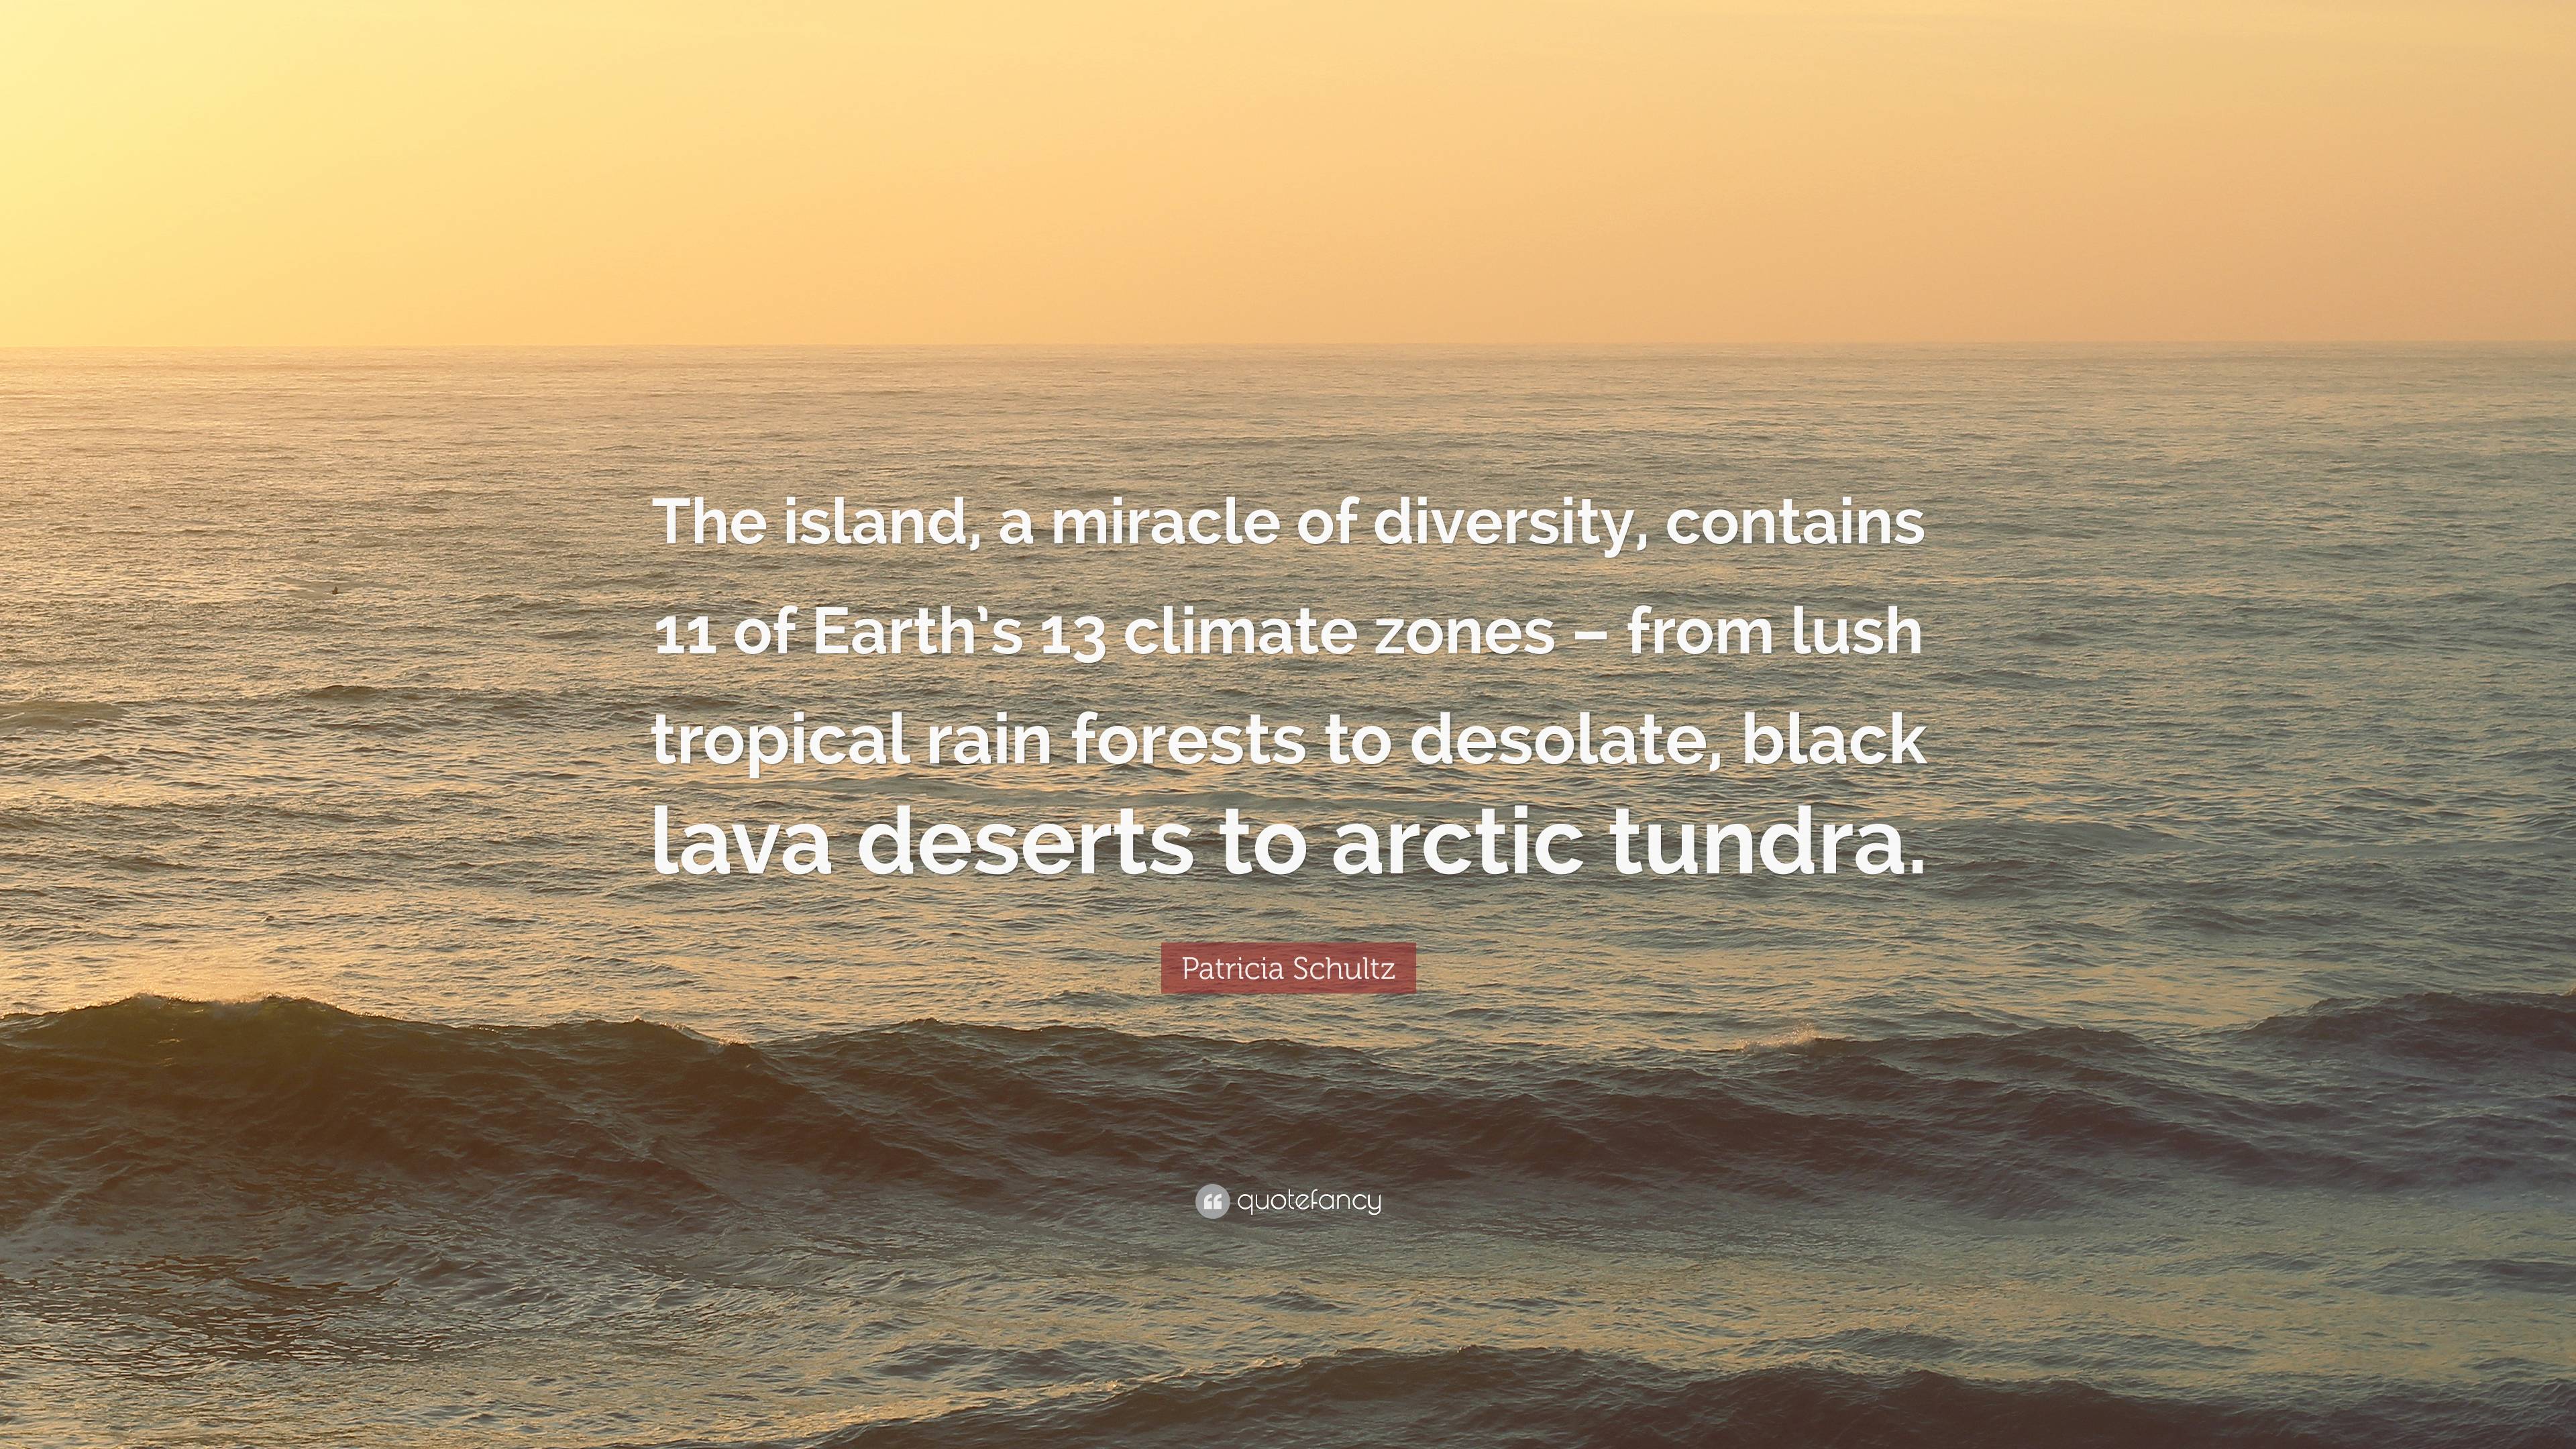 Patricia Schultz Quote: “The island, a miracle of diversity